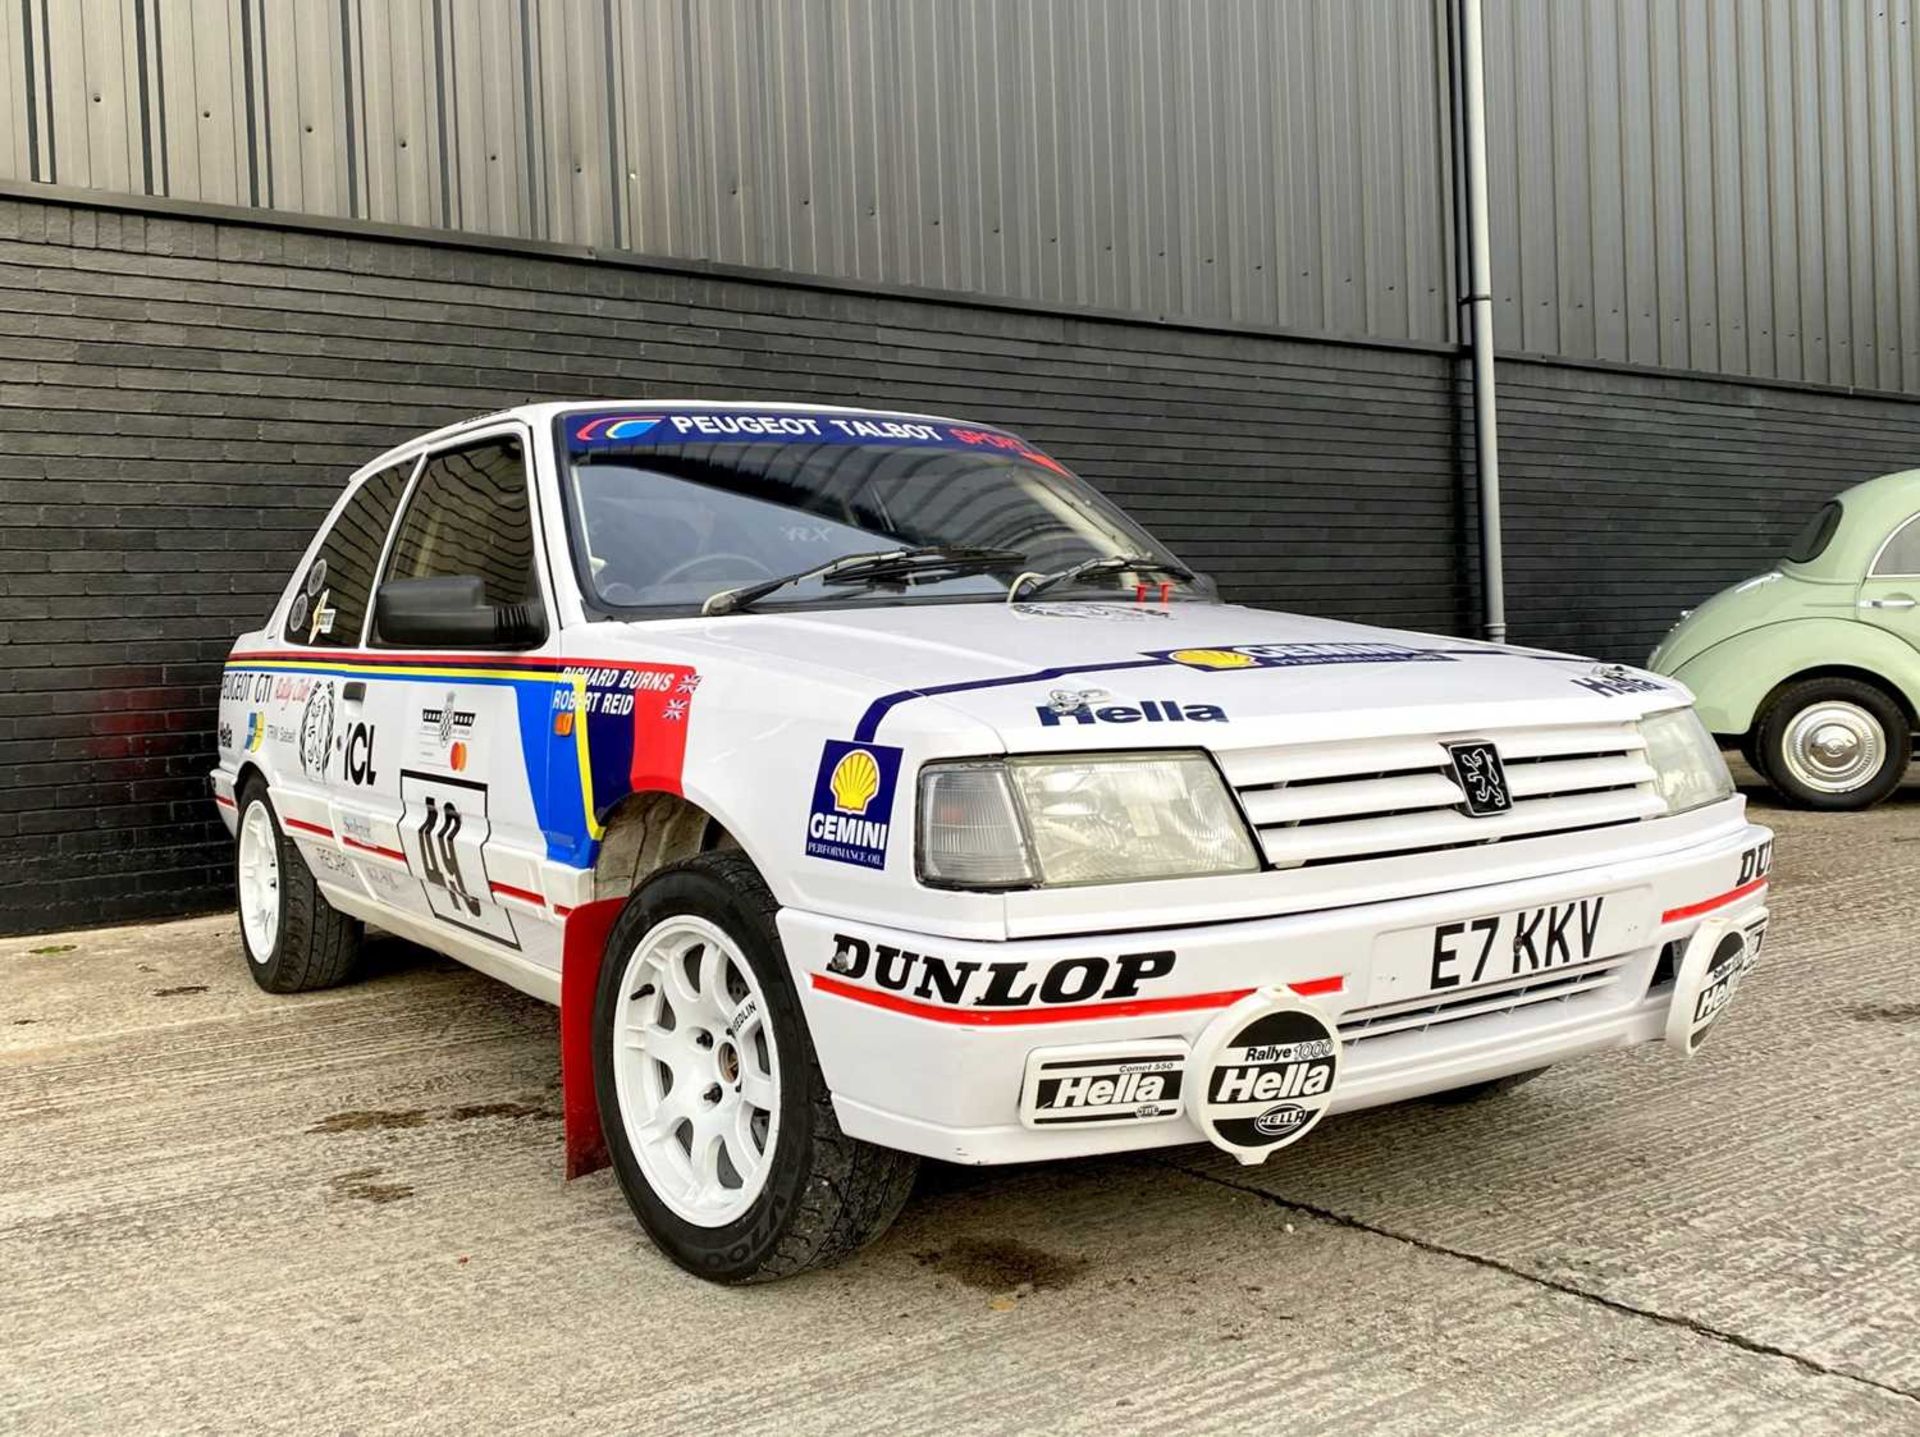 1987 Peugeot 309 GTi Group N Rally Car FIA paperwork and a previous entrant at the Goodwood Festival